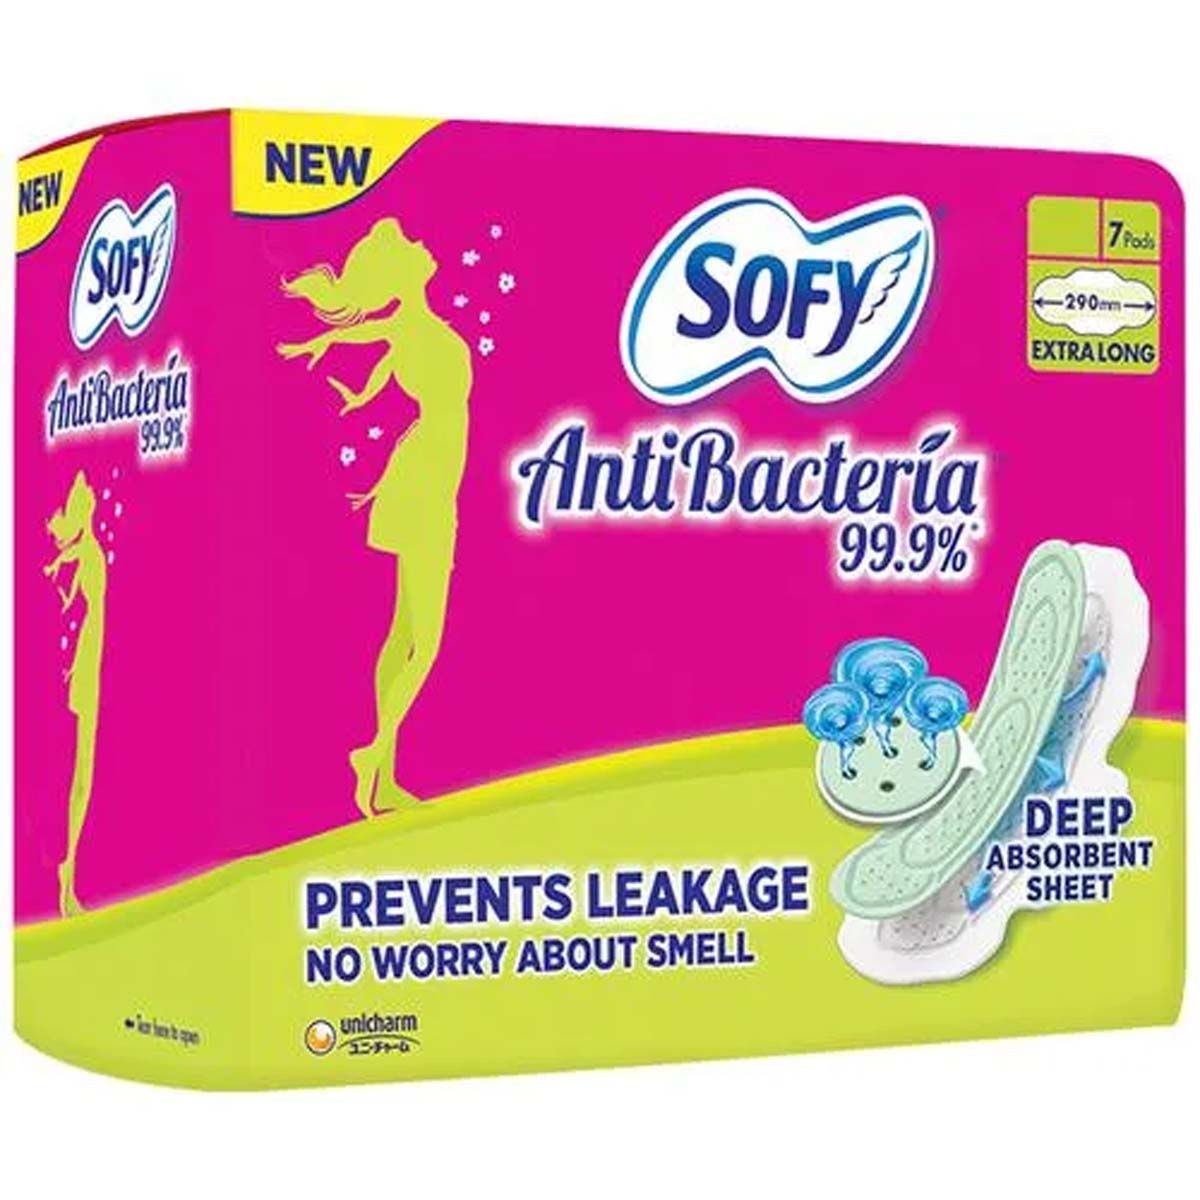 Sofy Bodyfit Antibacteria Pads Extra Long, 7 Count, Pack of 1 